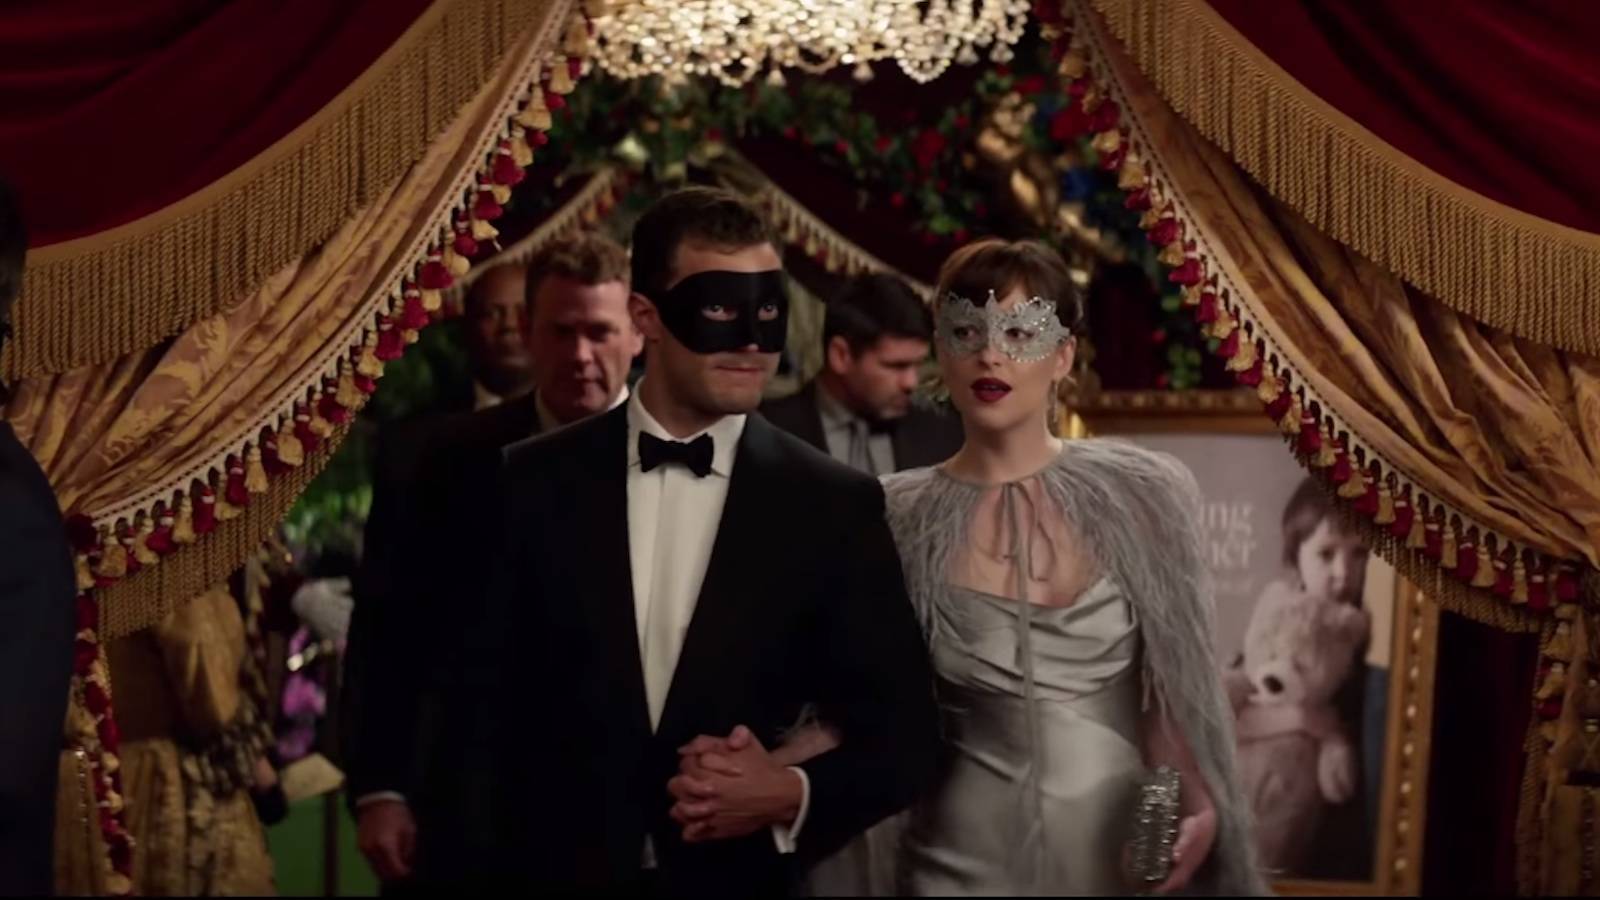 The Trailer For Fifty Shades Darker Looks So Dumb